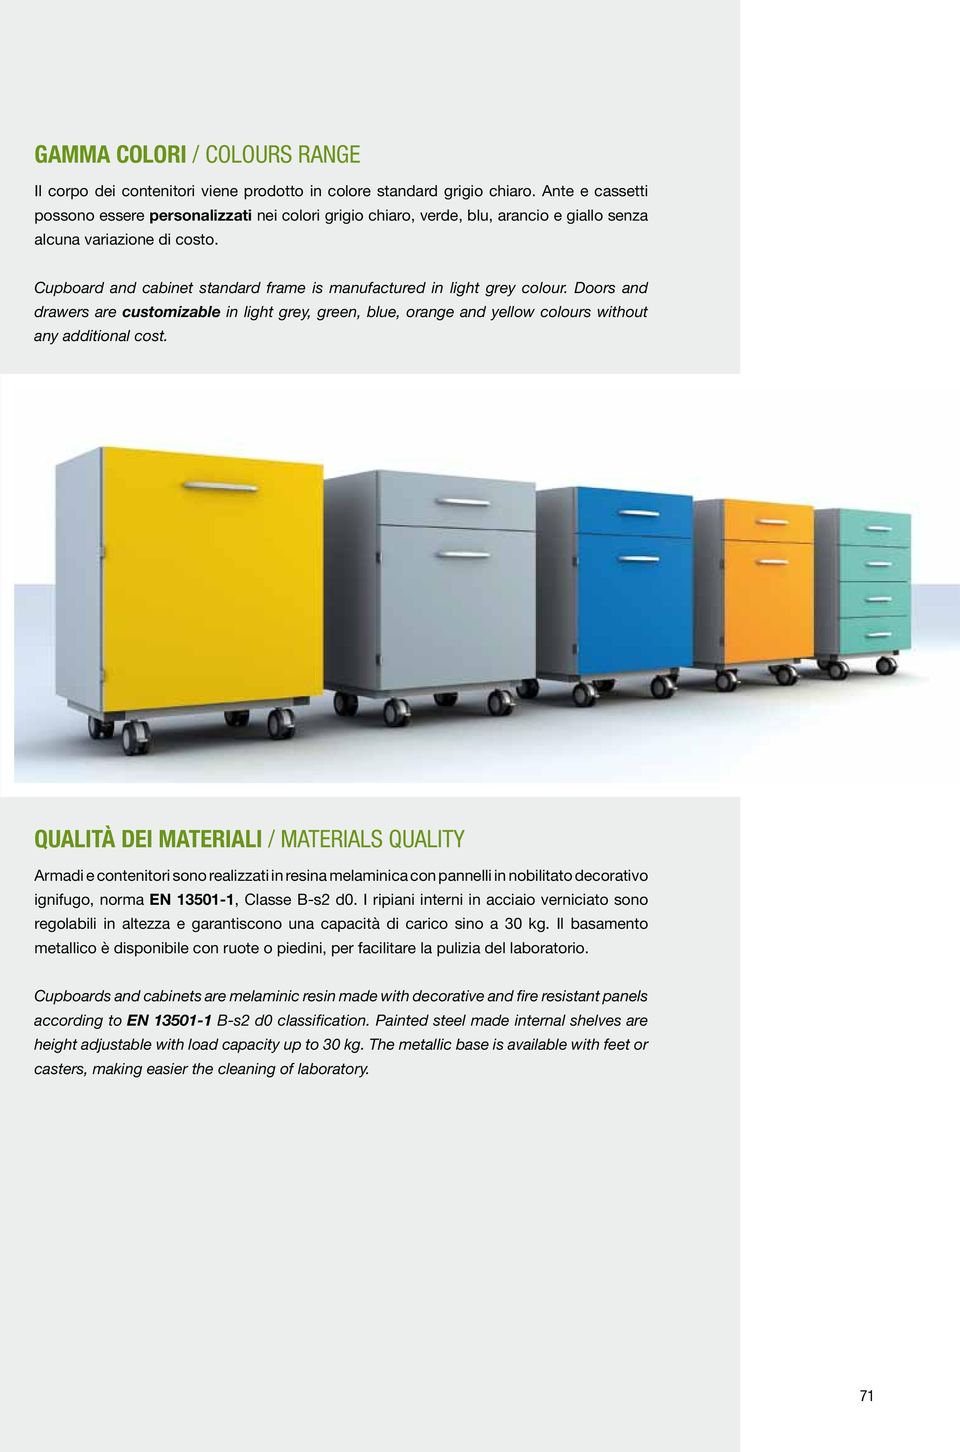 Cupboard and cabinet standard frame is manufactured in light grey colour. Doors and drawers are customizable in light grey, green, blue, orange and yellow colours without any additional cost.